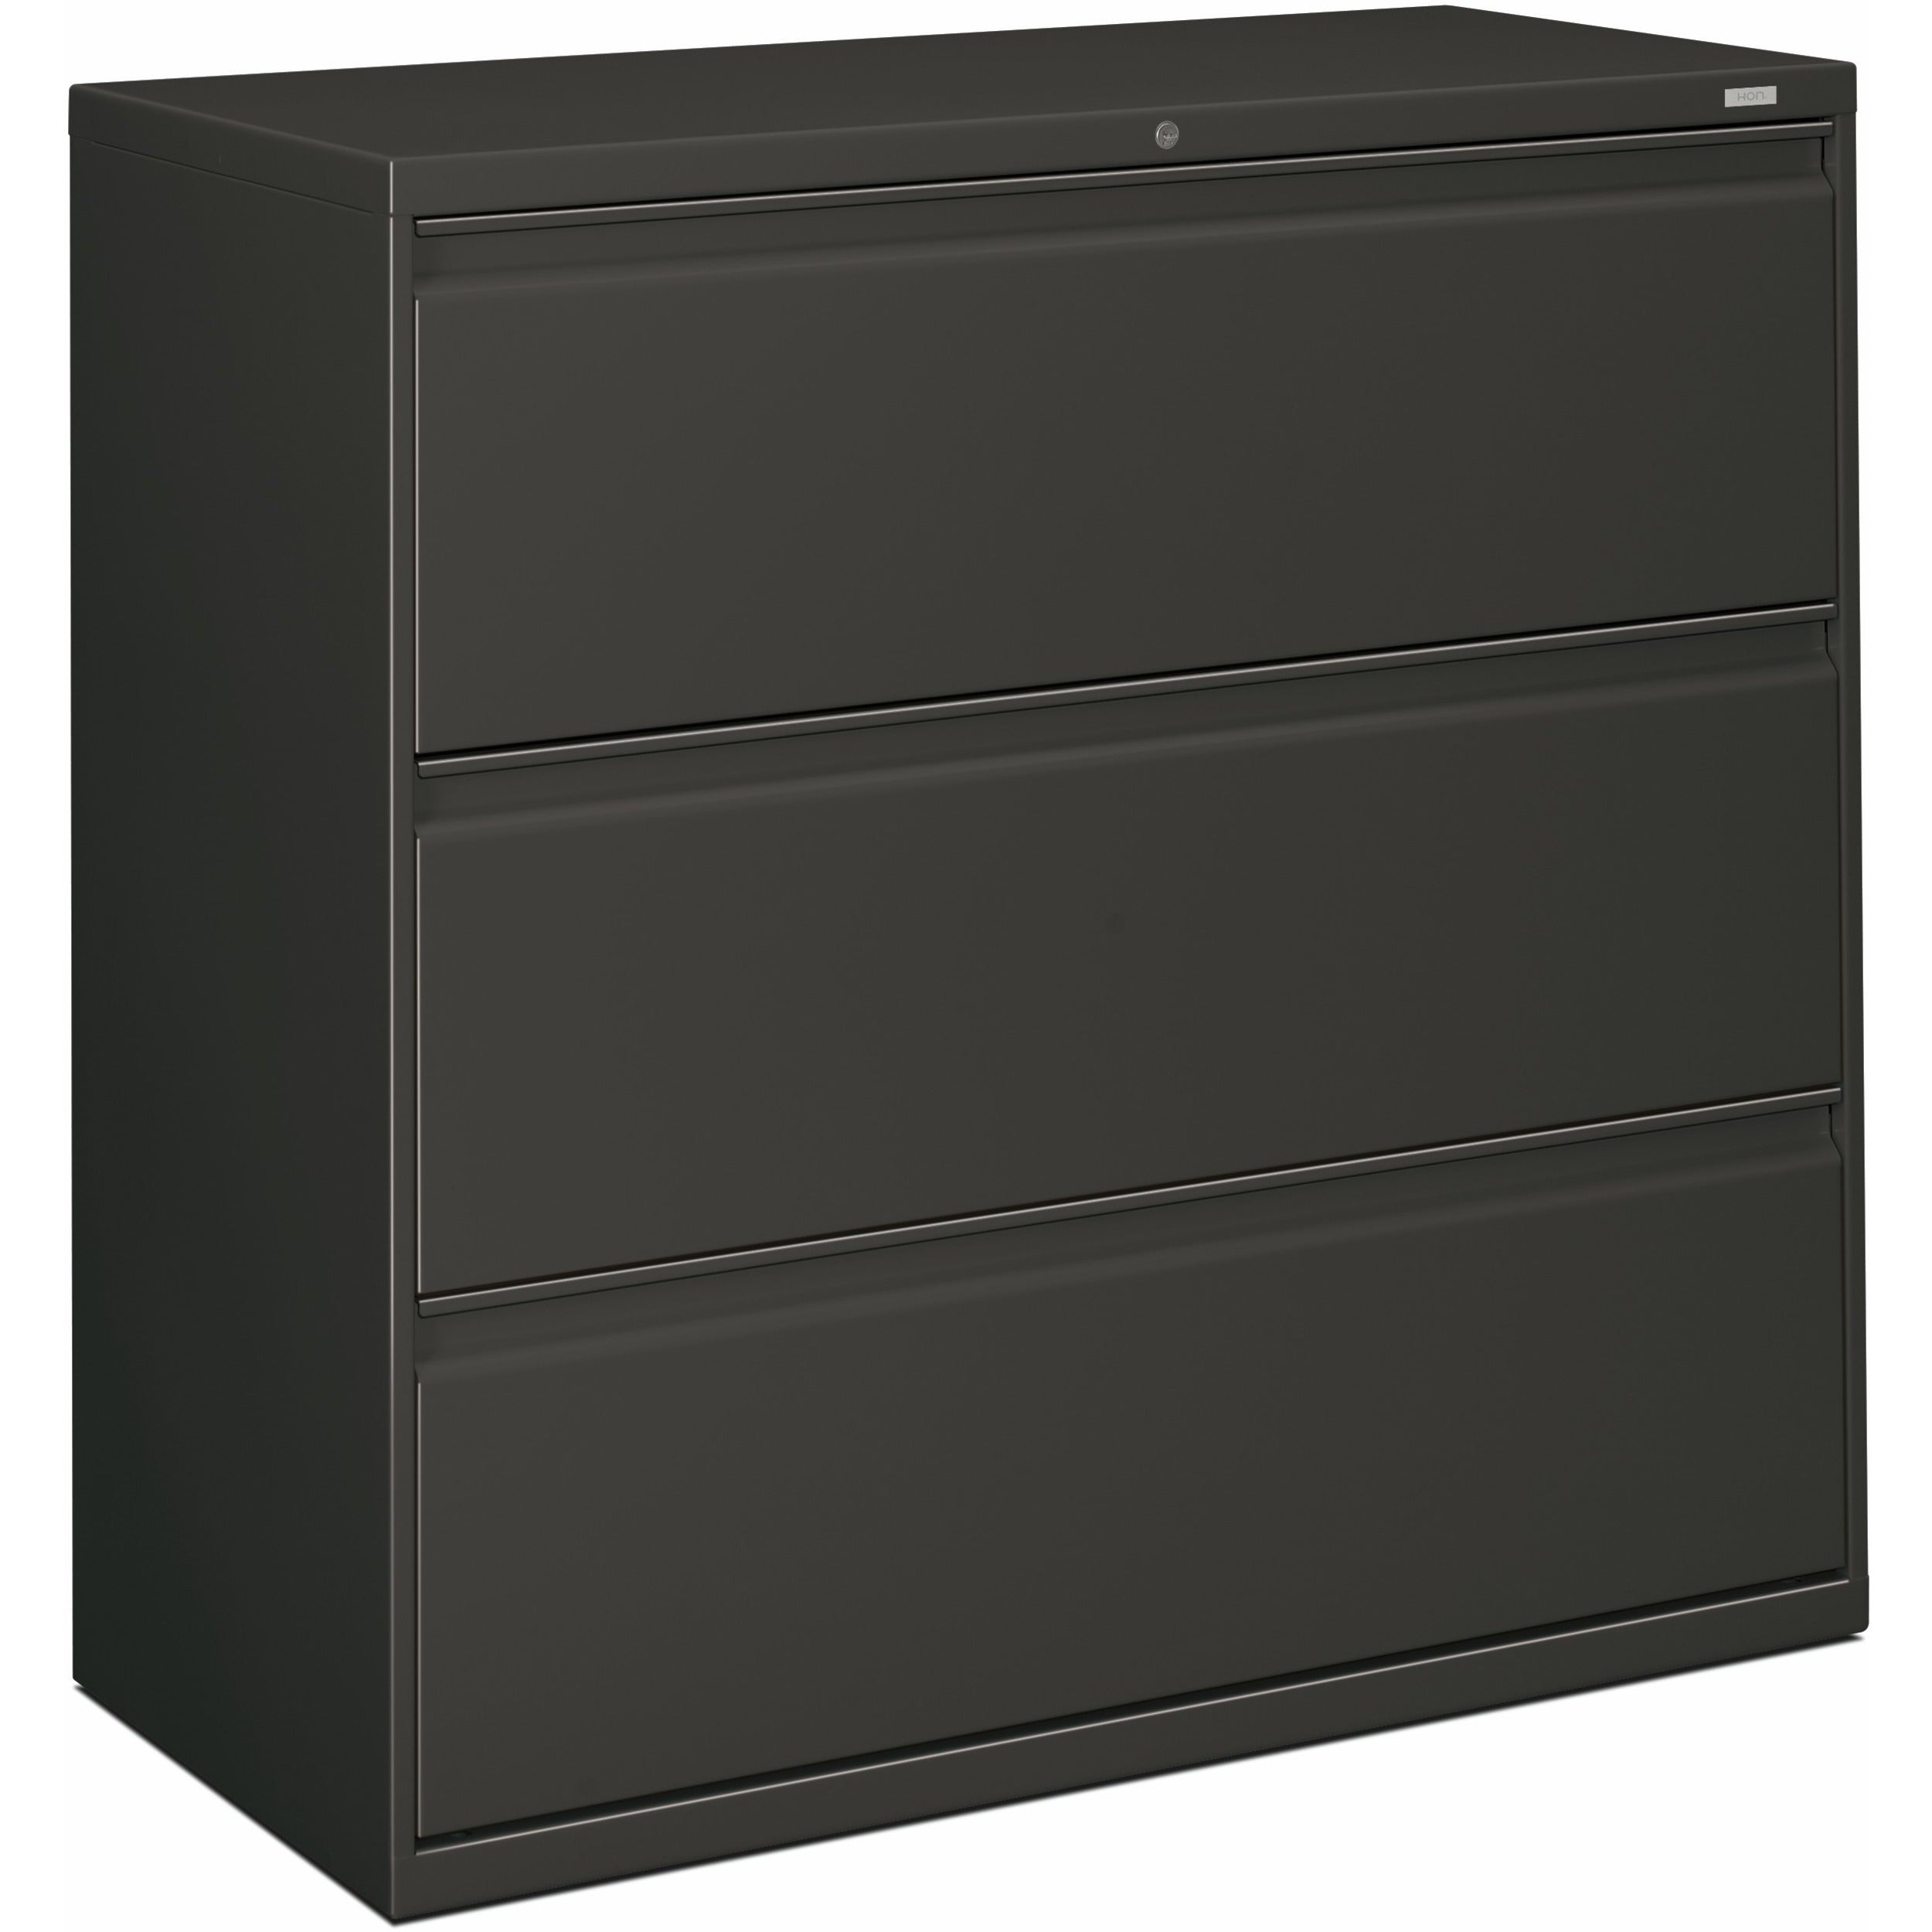 hon-brigade-800-h893-lateral-file-42-x-18409-3-drawers-finish-charcoal_hon893ls - 1